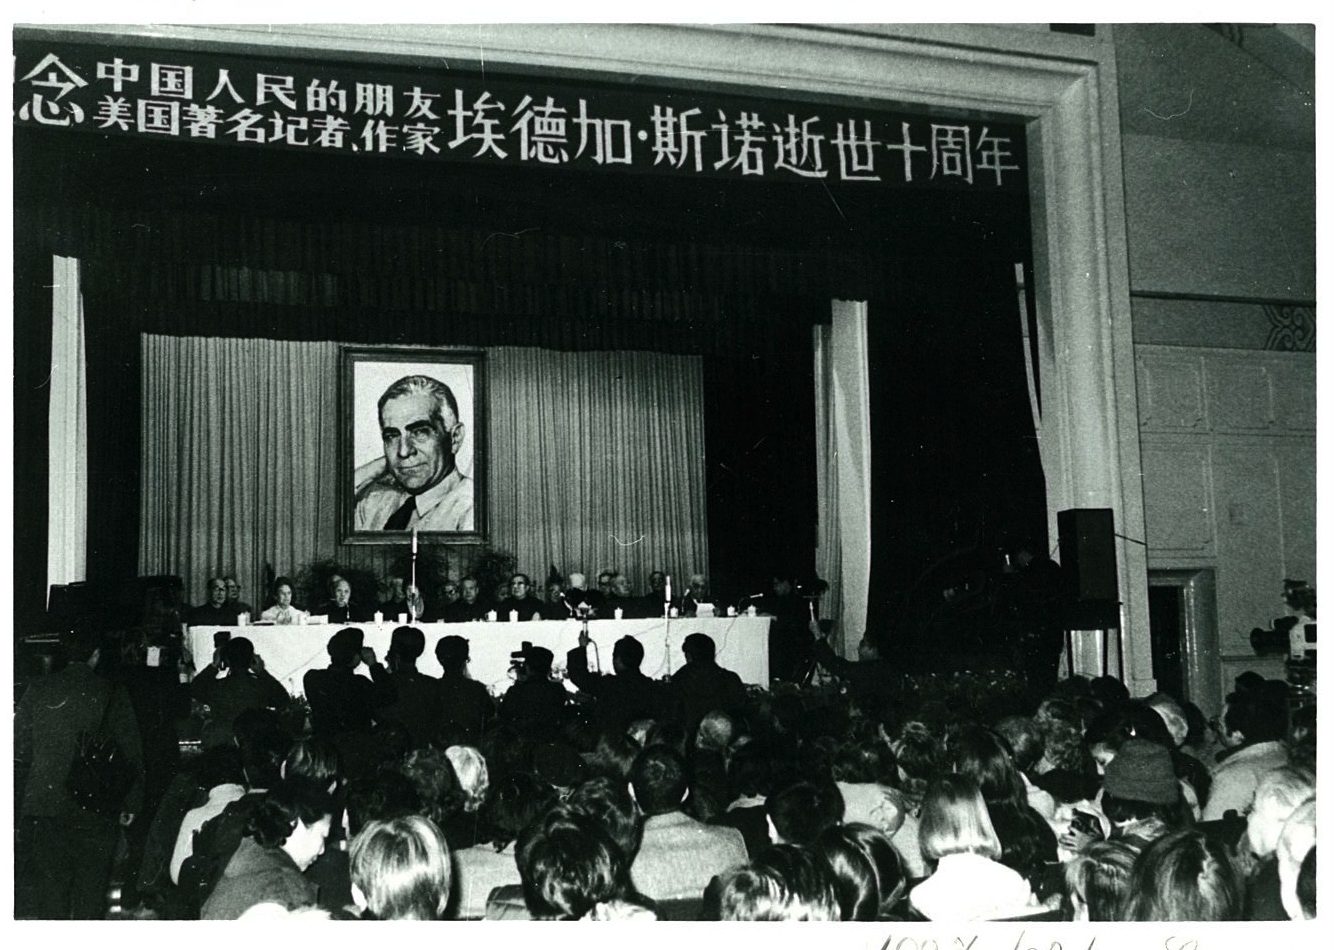 Edgar Snow Portrait hanging over stage at an event in China